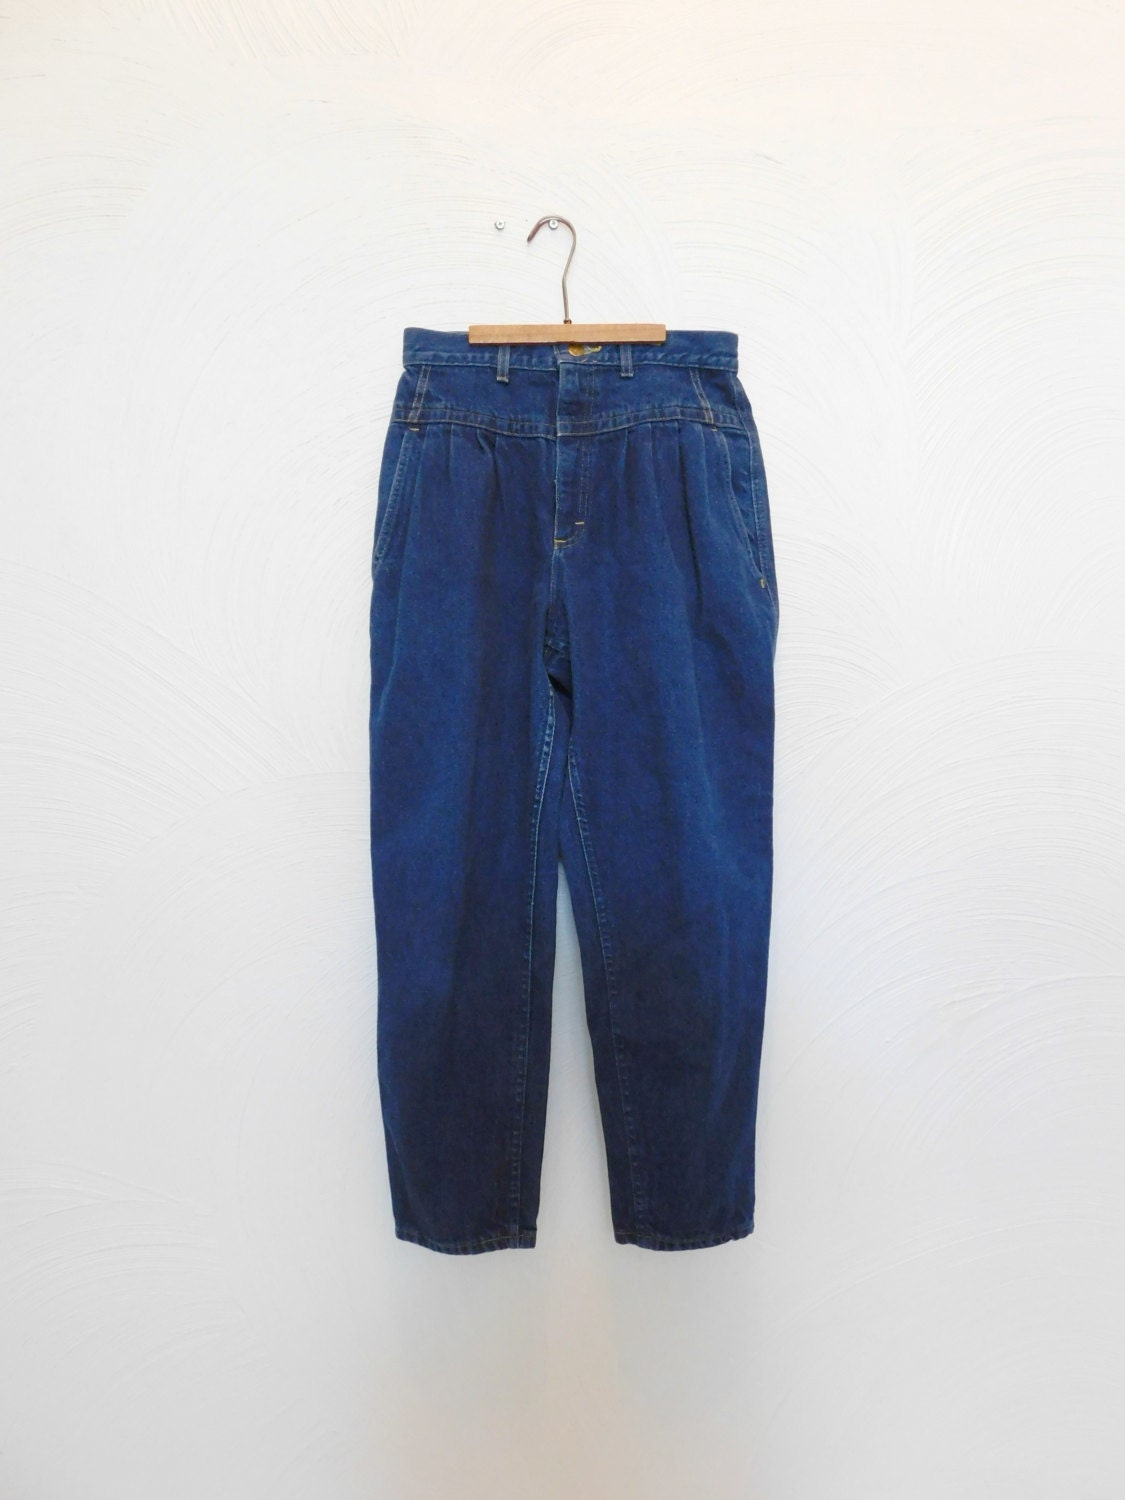 1980s Lee Jeans Vintage 80s Pleated High Rise Blue Jeans 28W